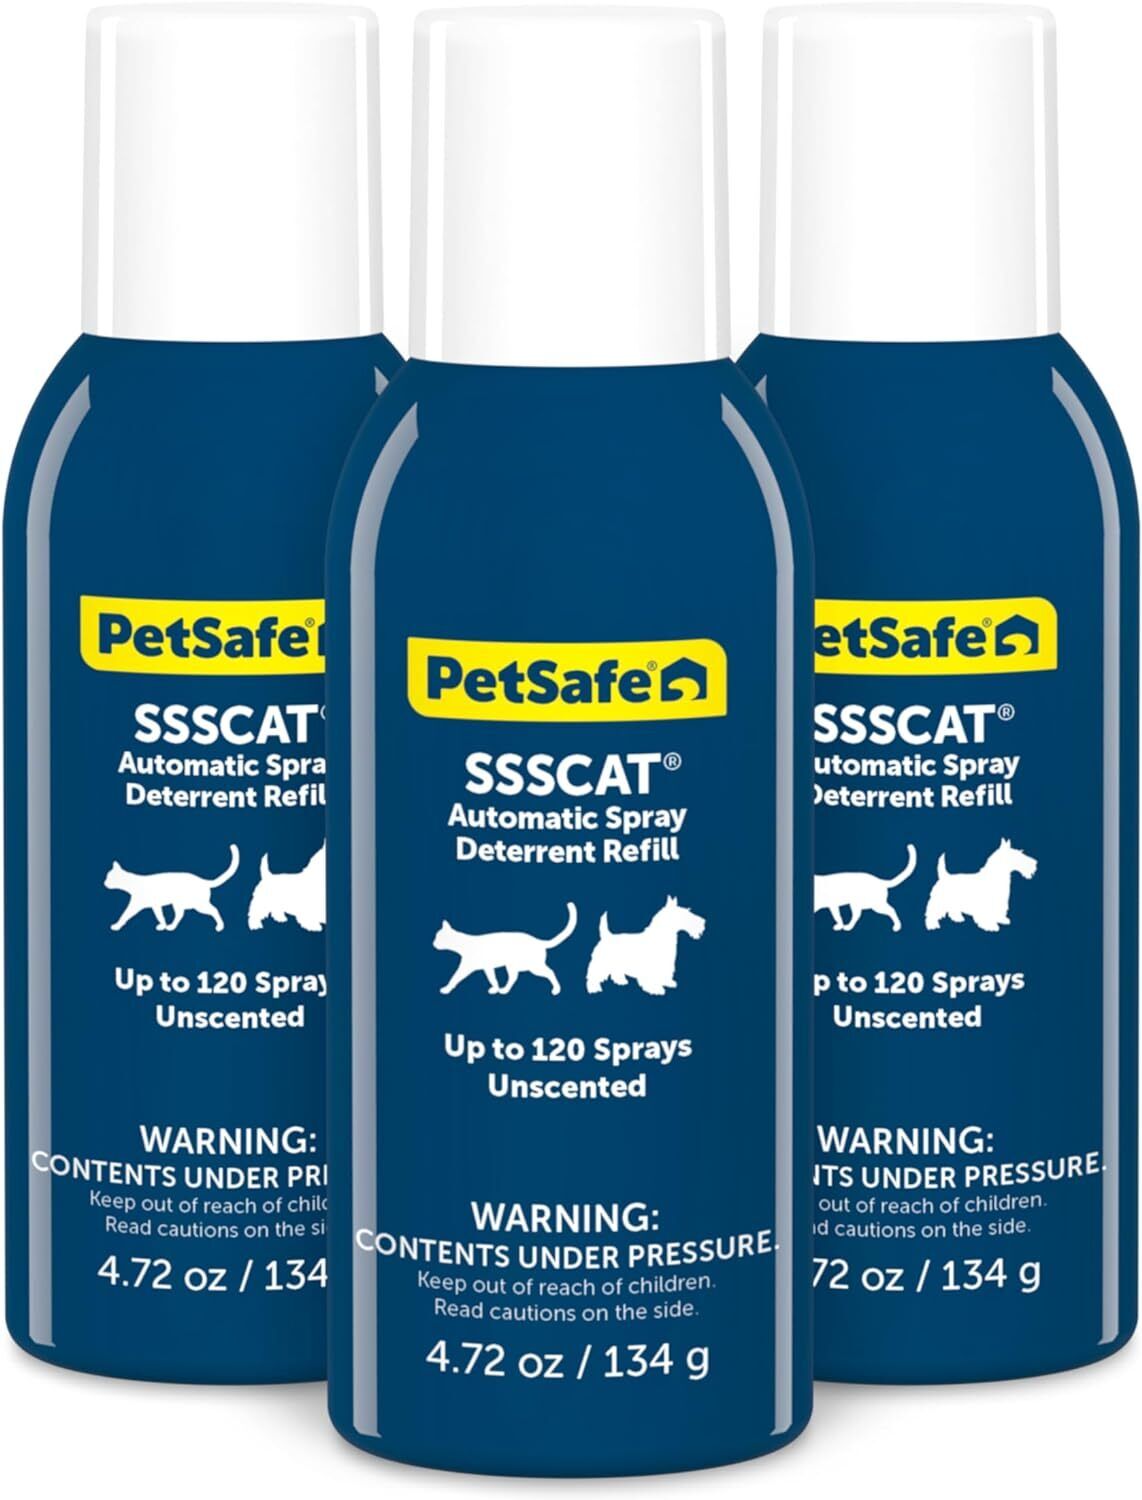 PetSafe SSSCAT PPD00-17622 Refill Can 3-Pack: Compatible with 1st and 2nd Gen